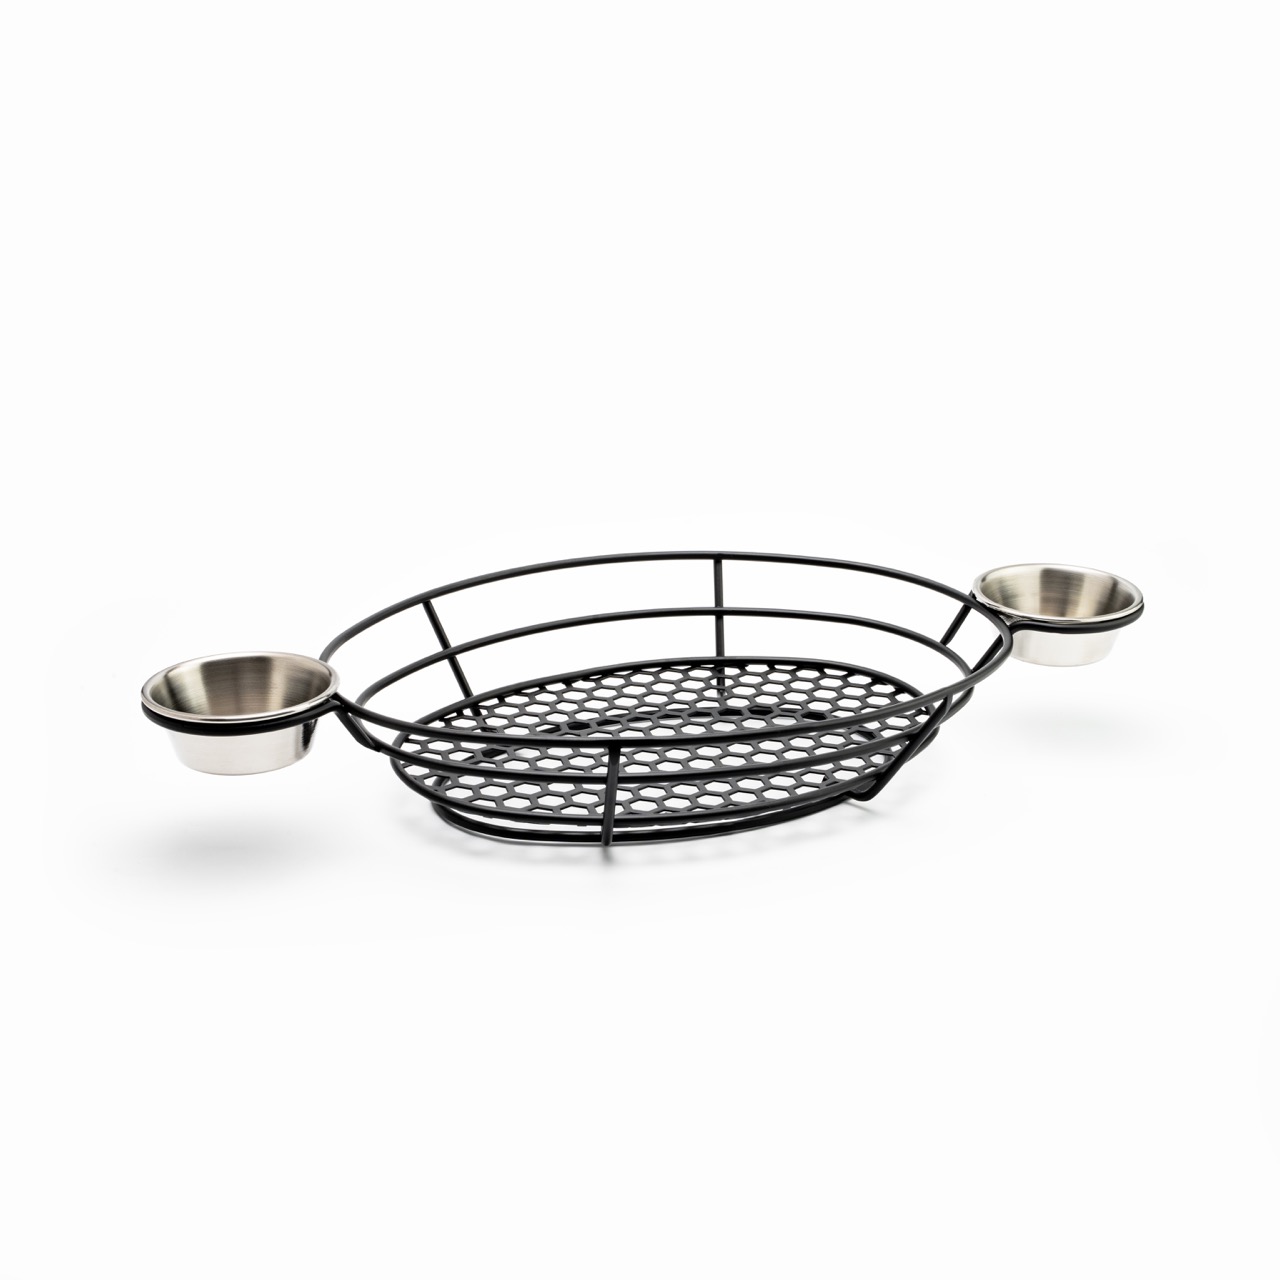 Big 2 Sauce Cups Oval Bread – Potato Serving Wire Basket